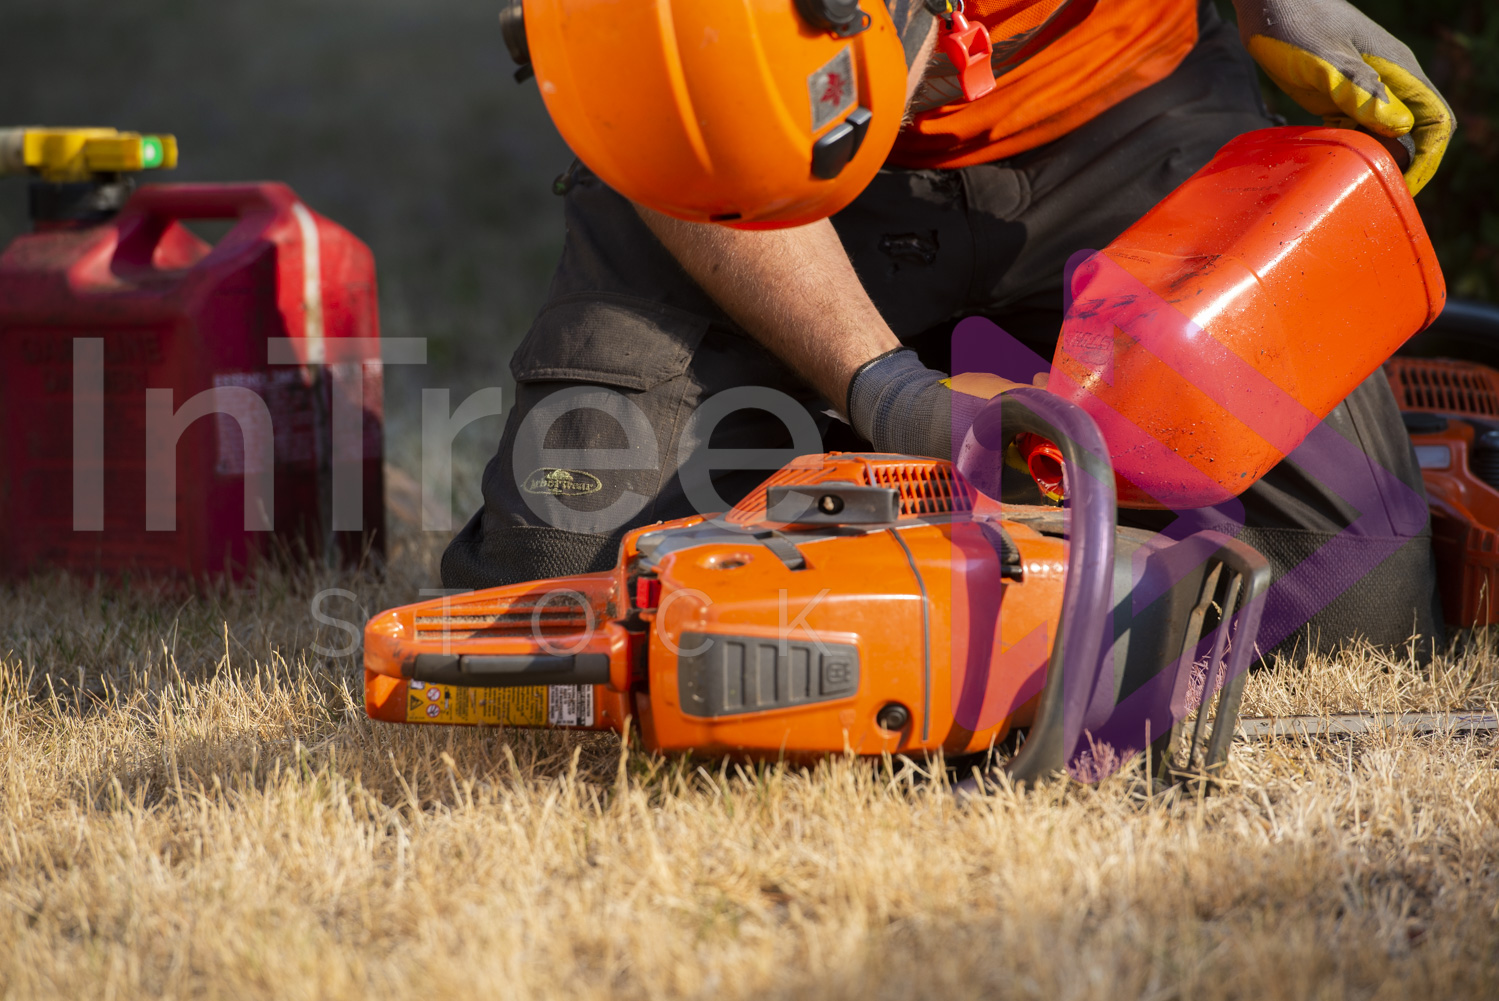 Refill chainsaw with bar oil